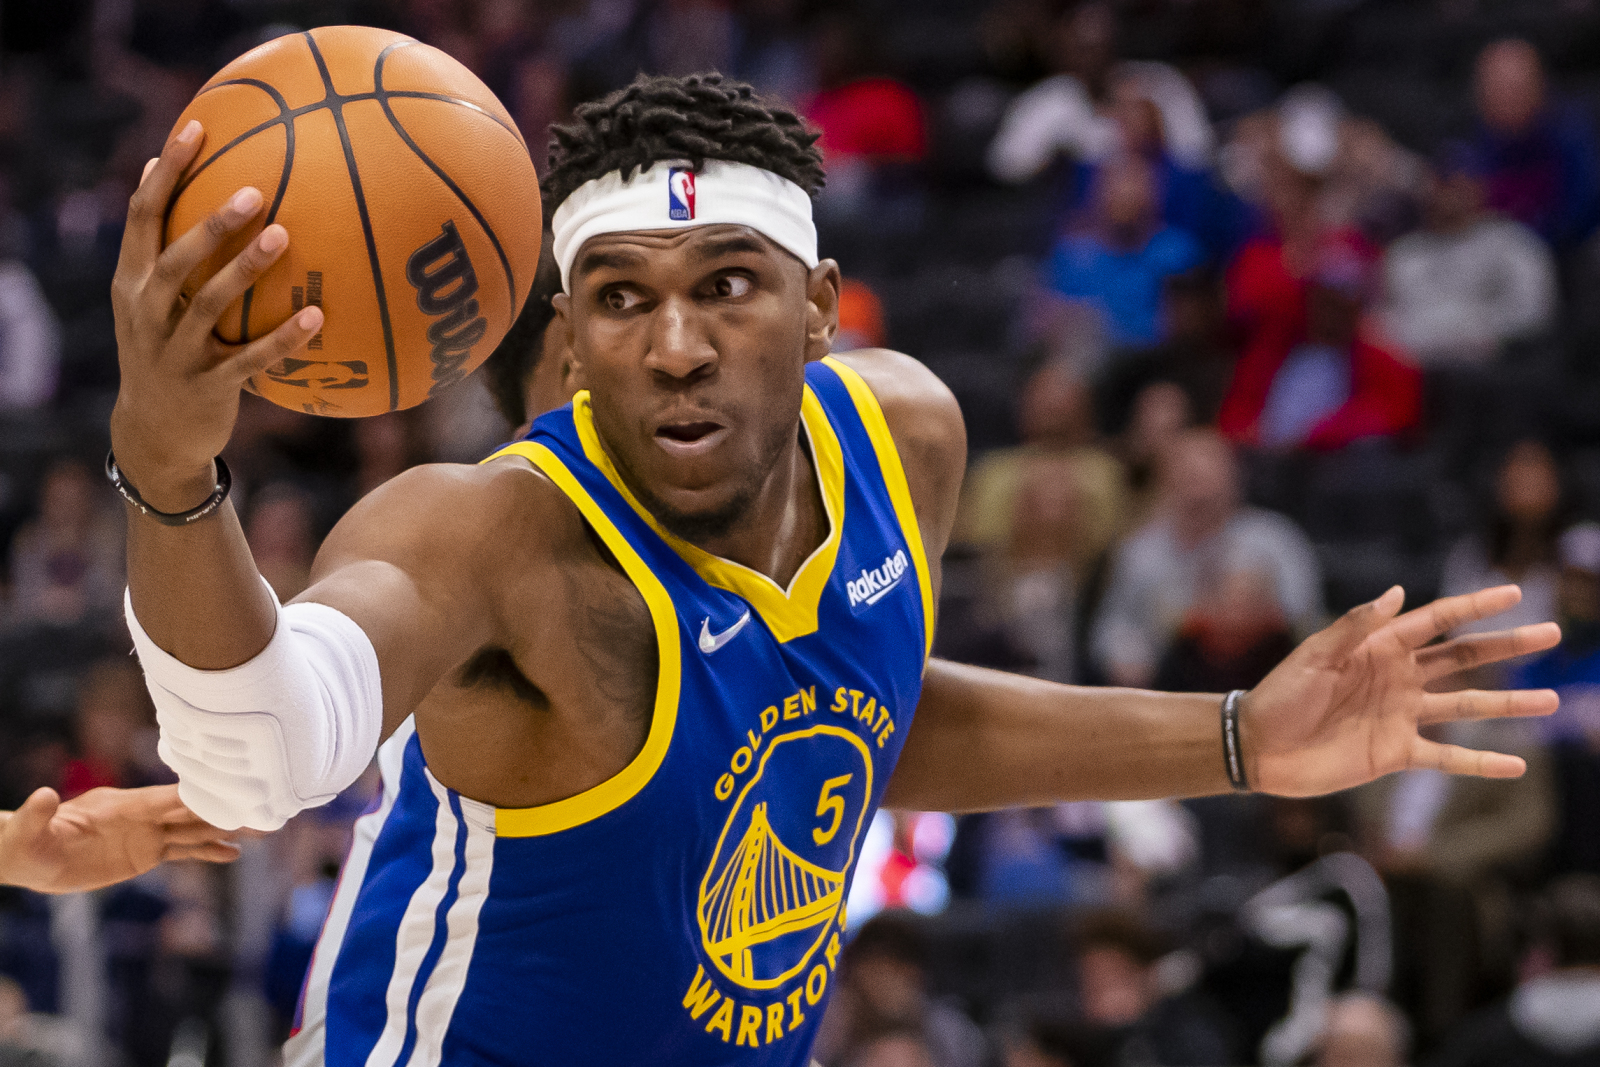 Warriors' Kevon Looney on verge of rare back-to-back all-82 seasons